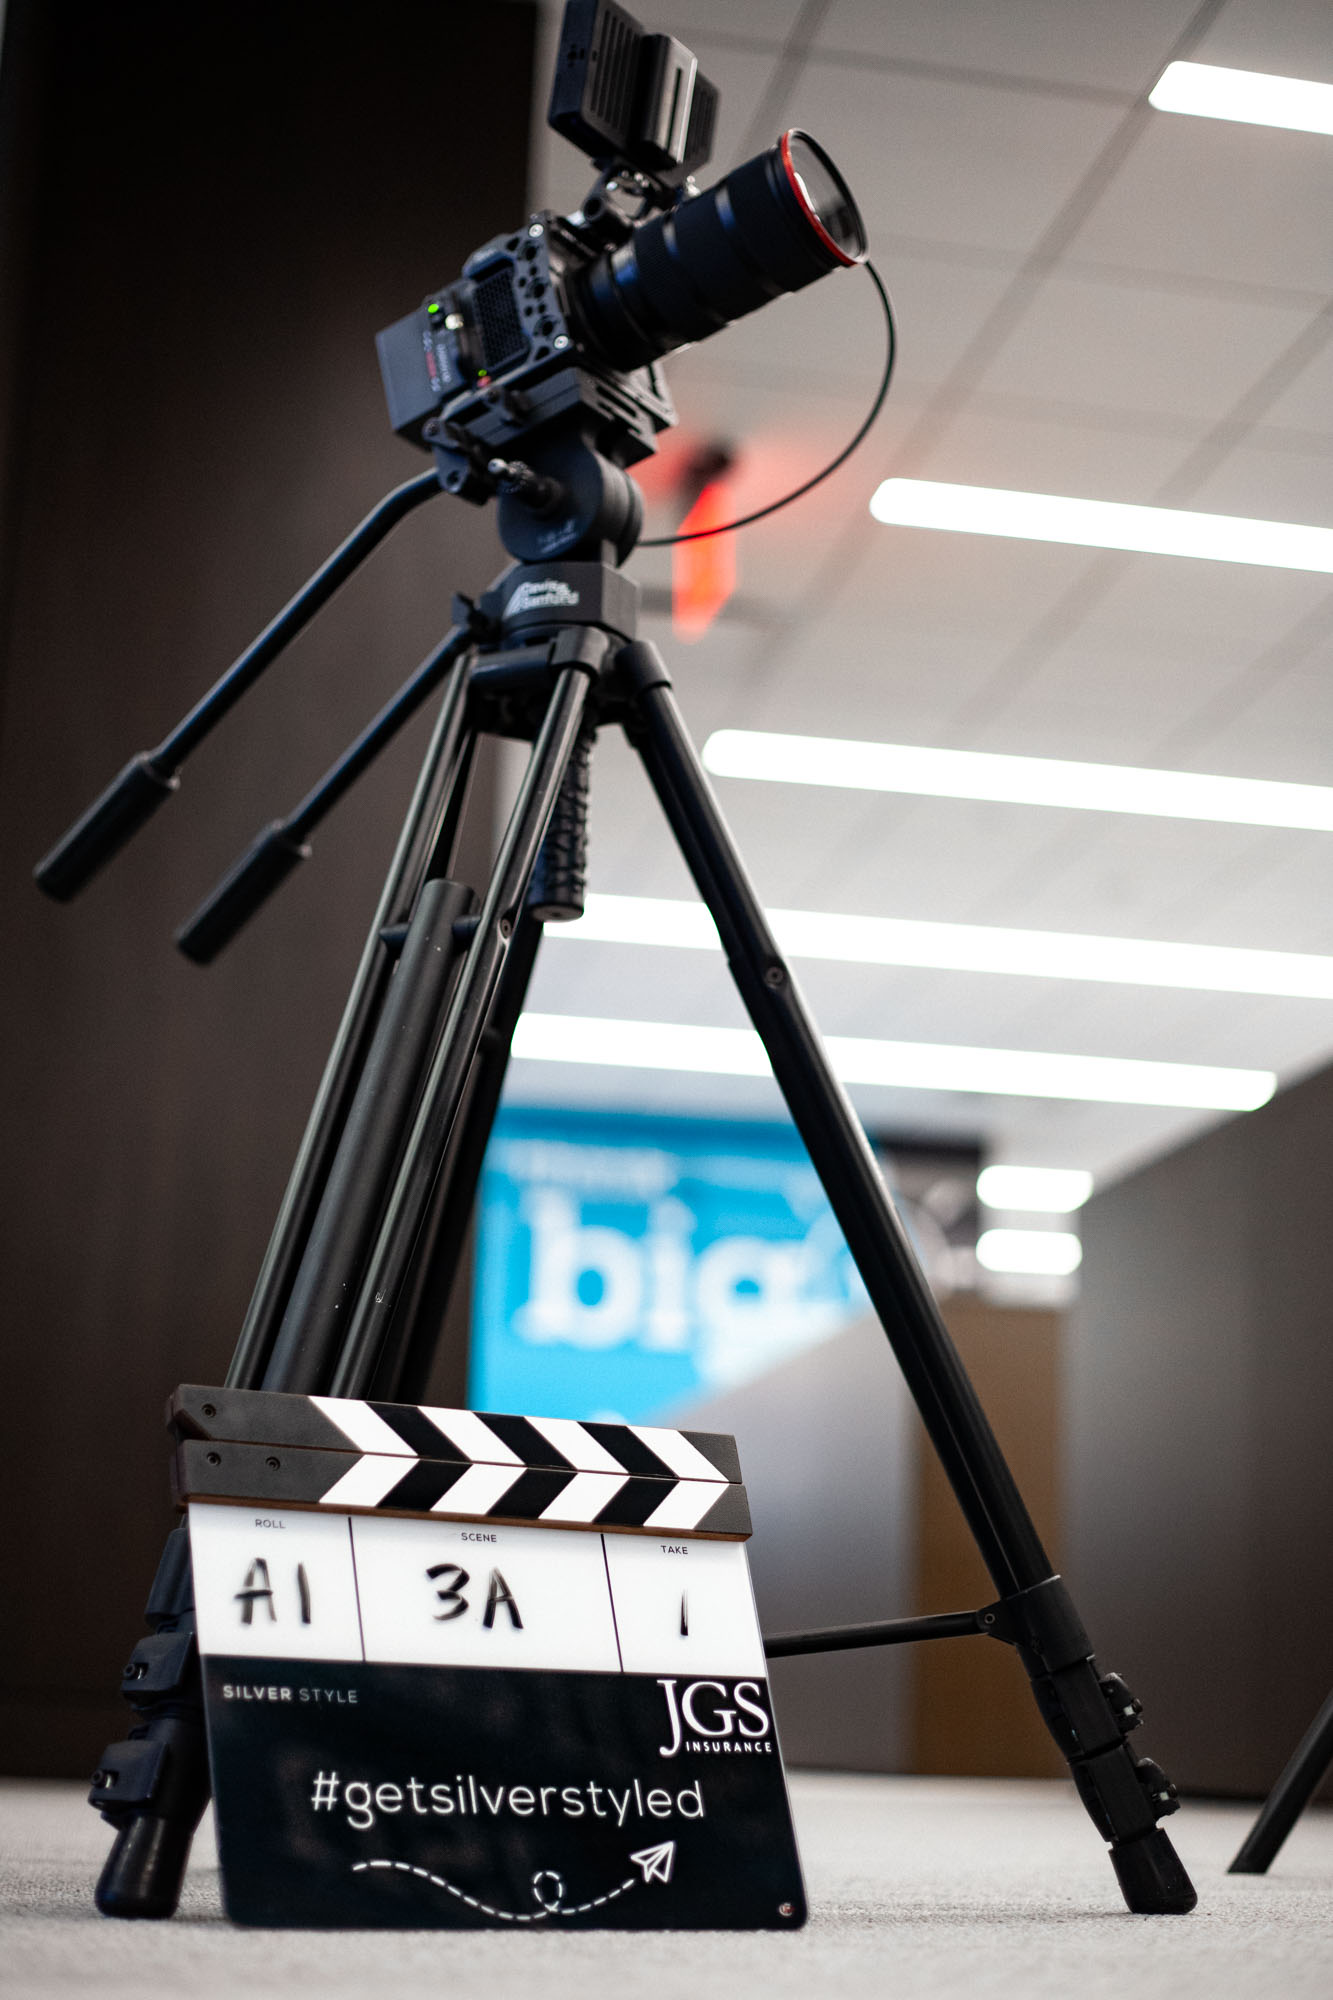 Camera and film slate on-location in for video production in corporate business office.